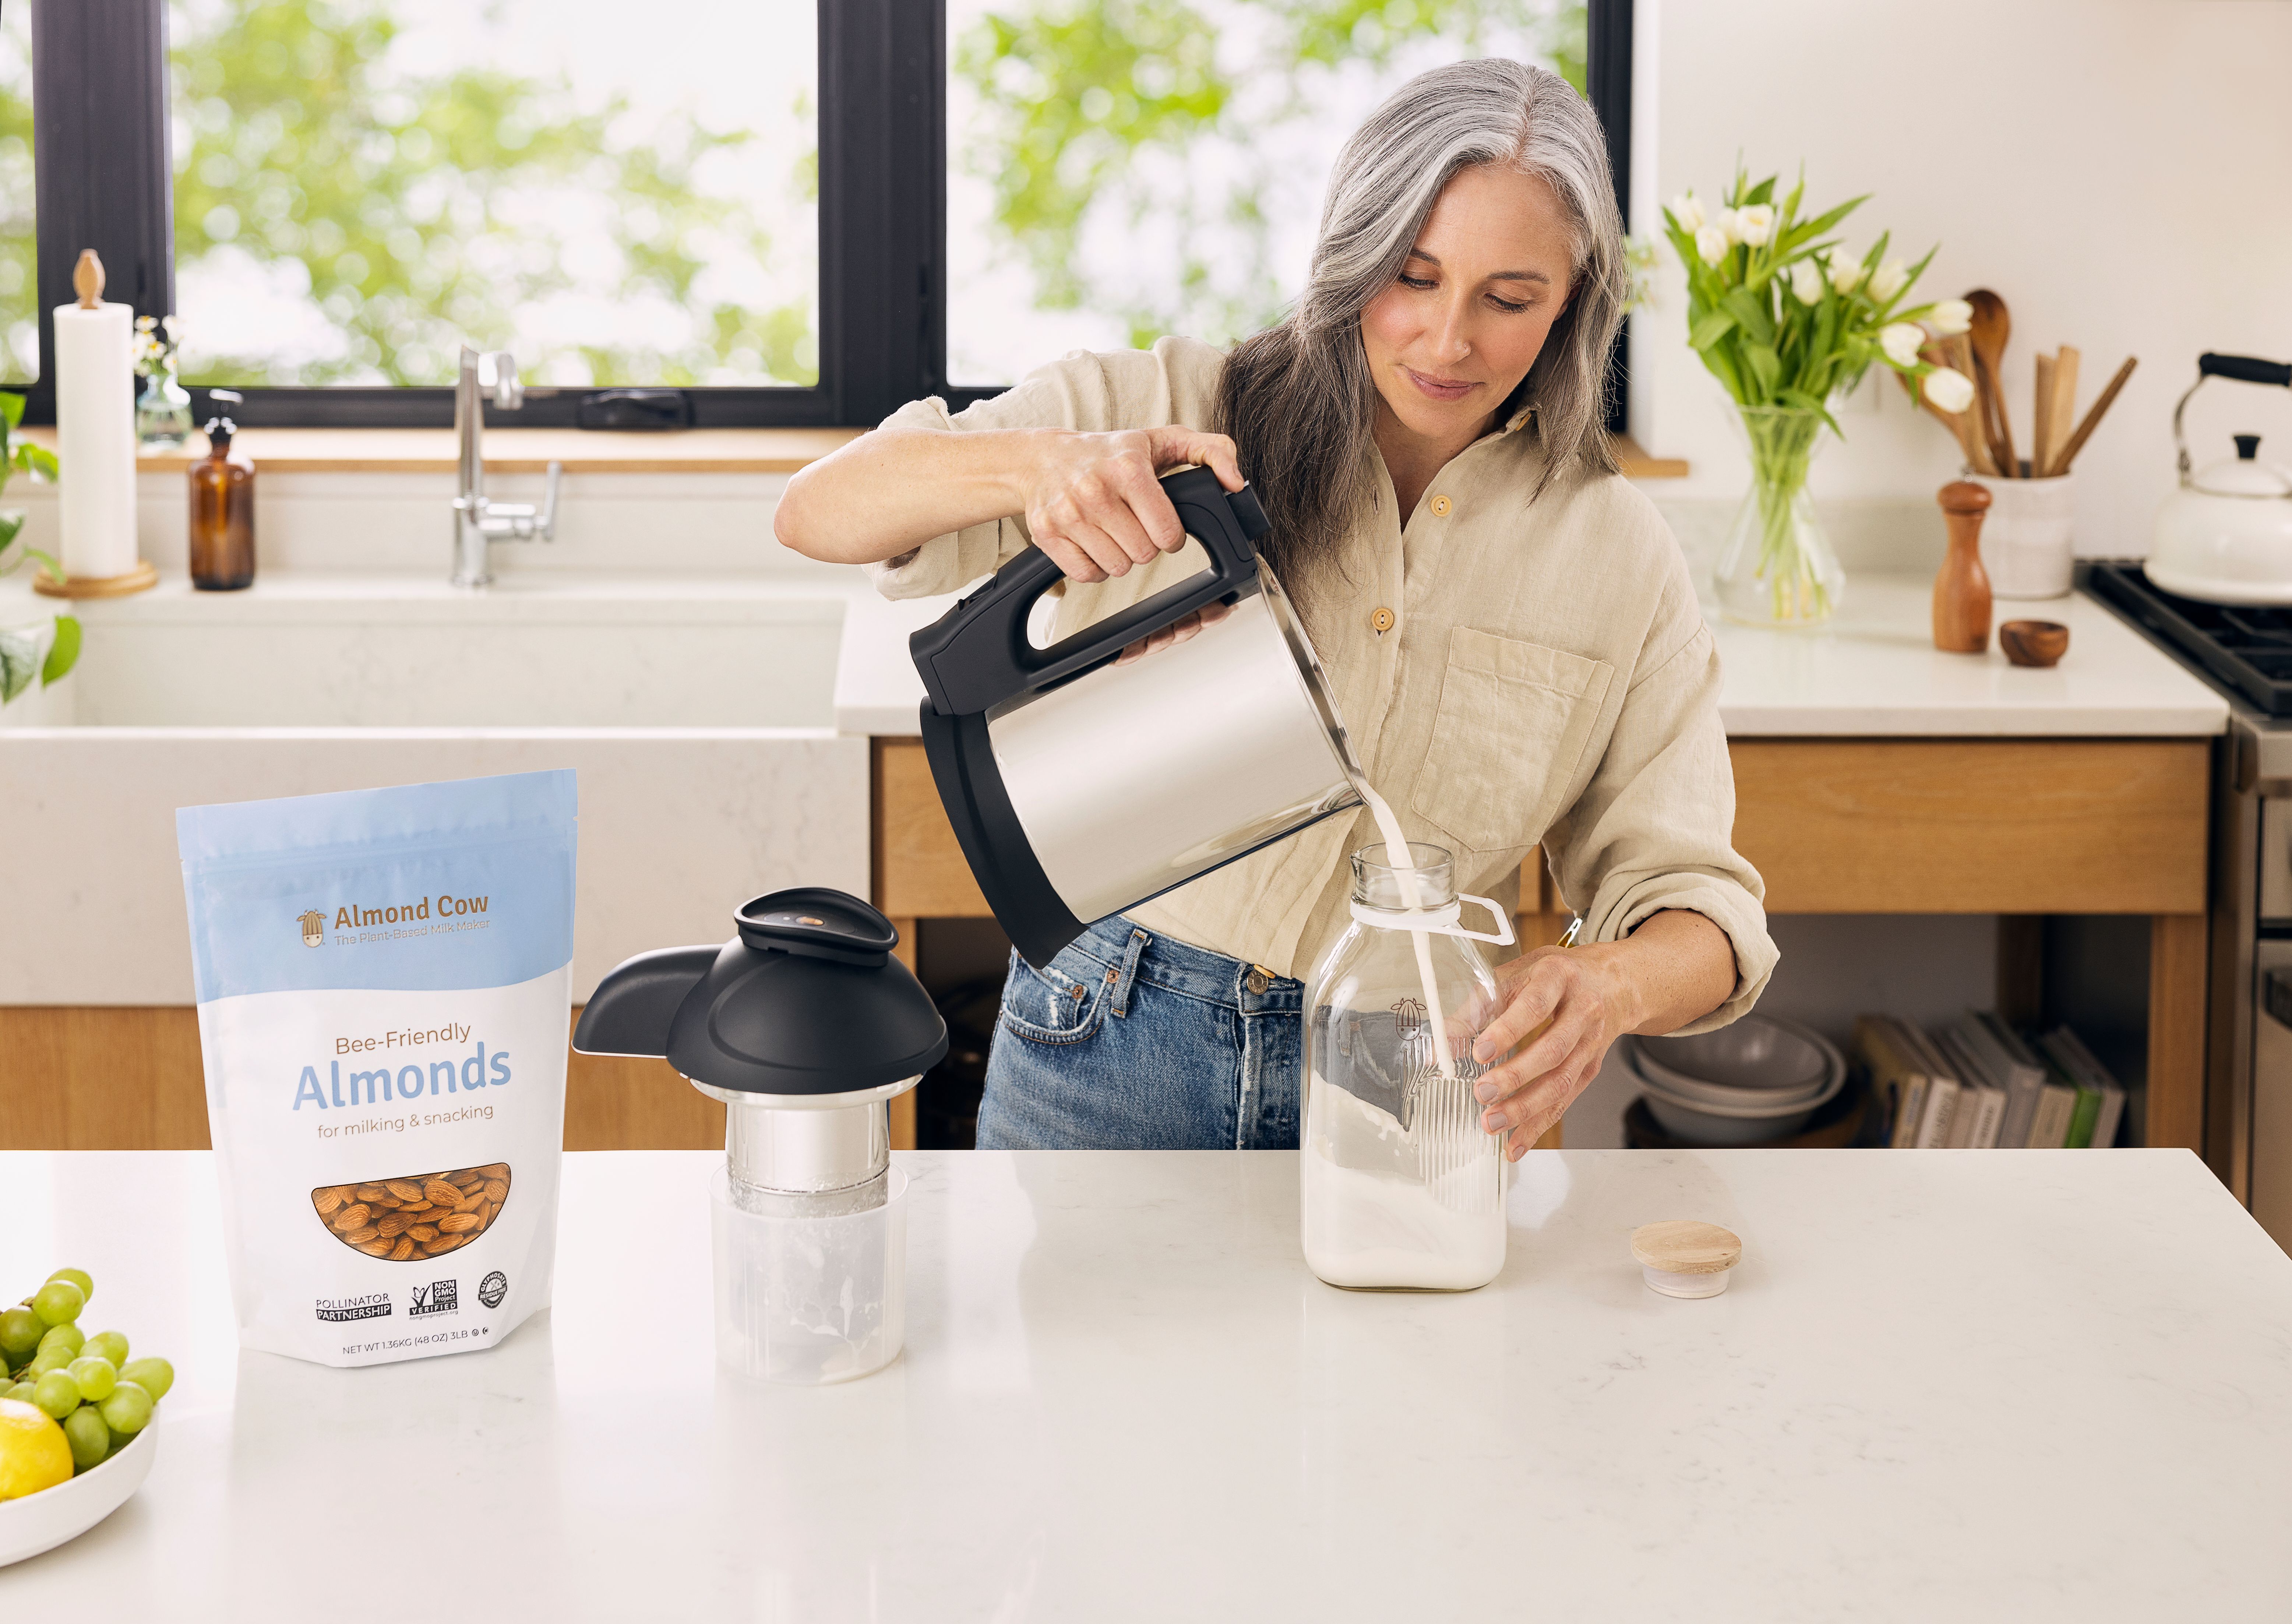 Guide on making almond milk with health benefits and nutrition facts